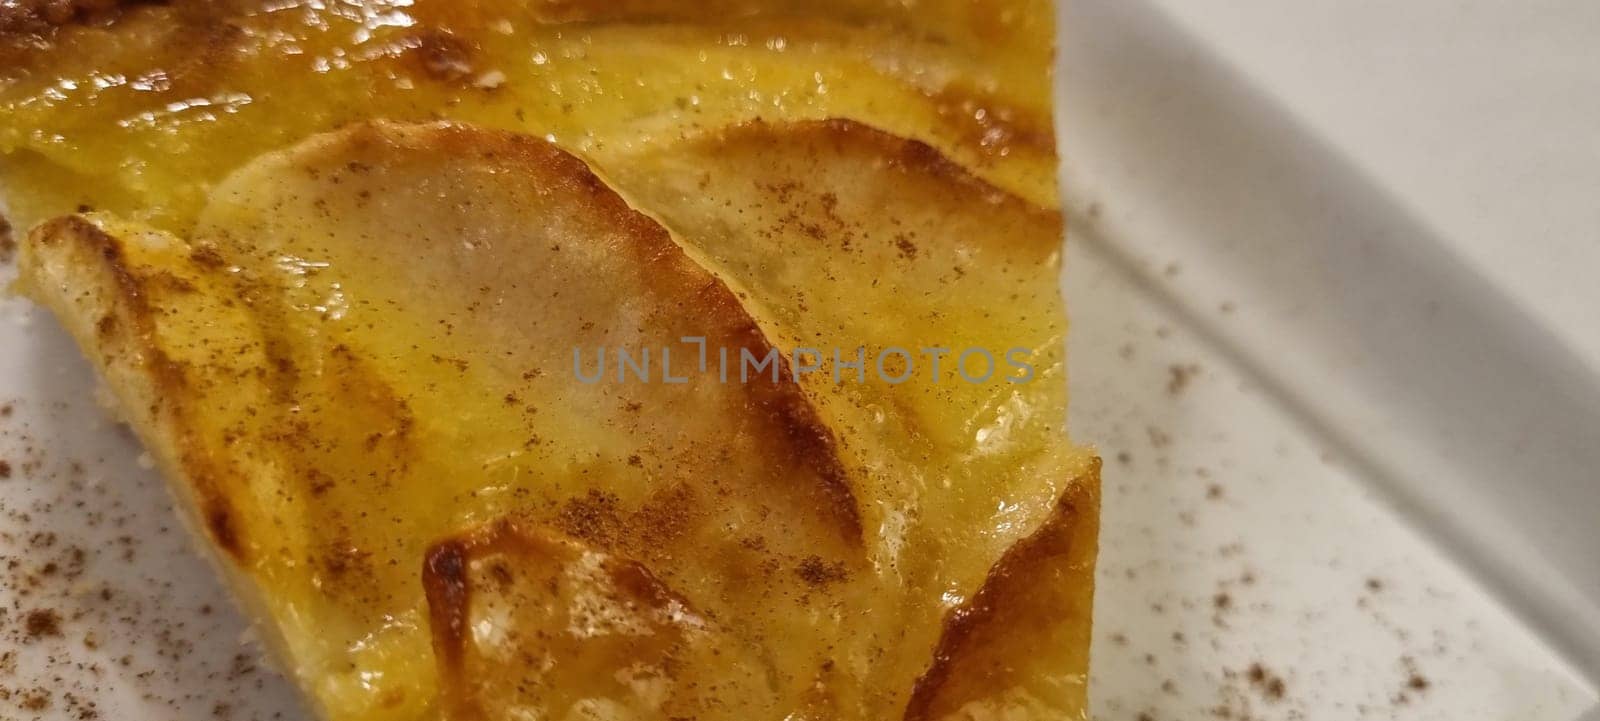 Detailed image capturing the texture and glaze of a freshly baked apple tart piece sprinkled with cinnamon